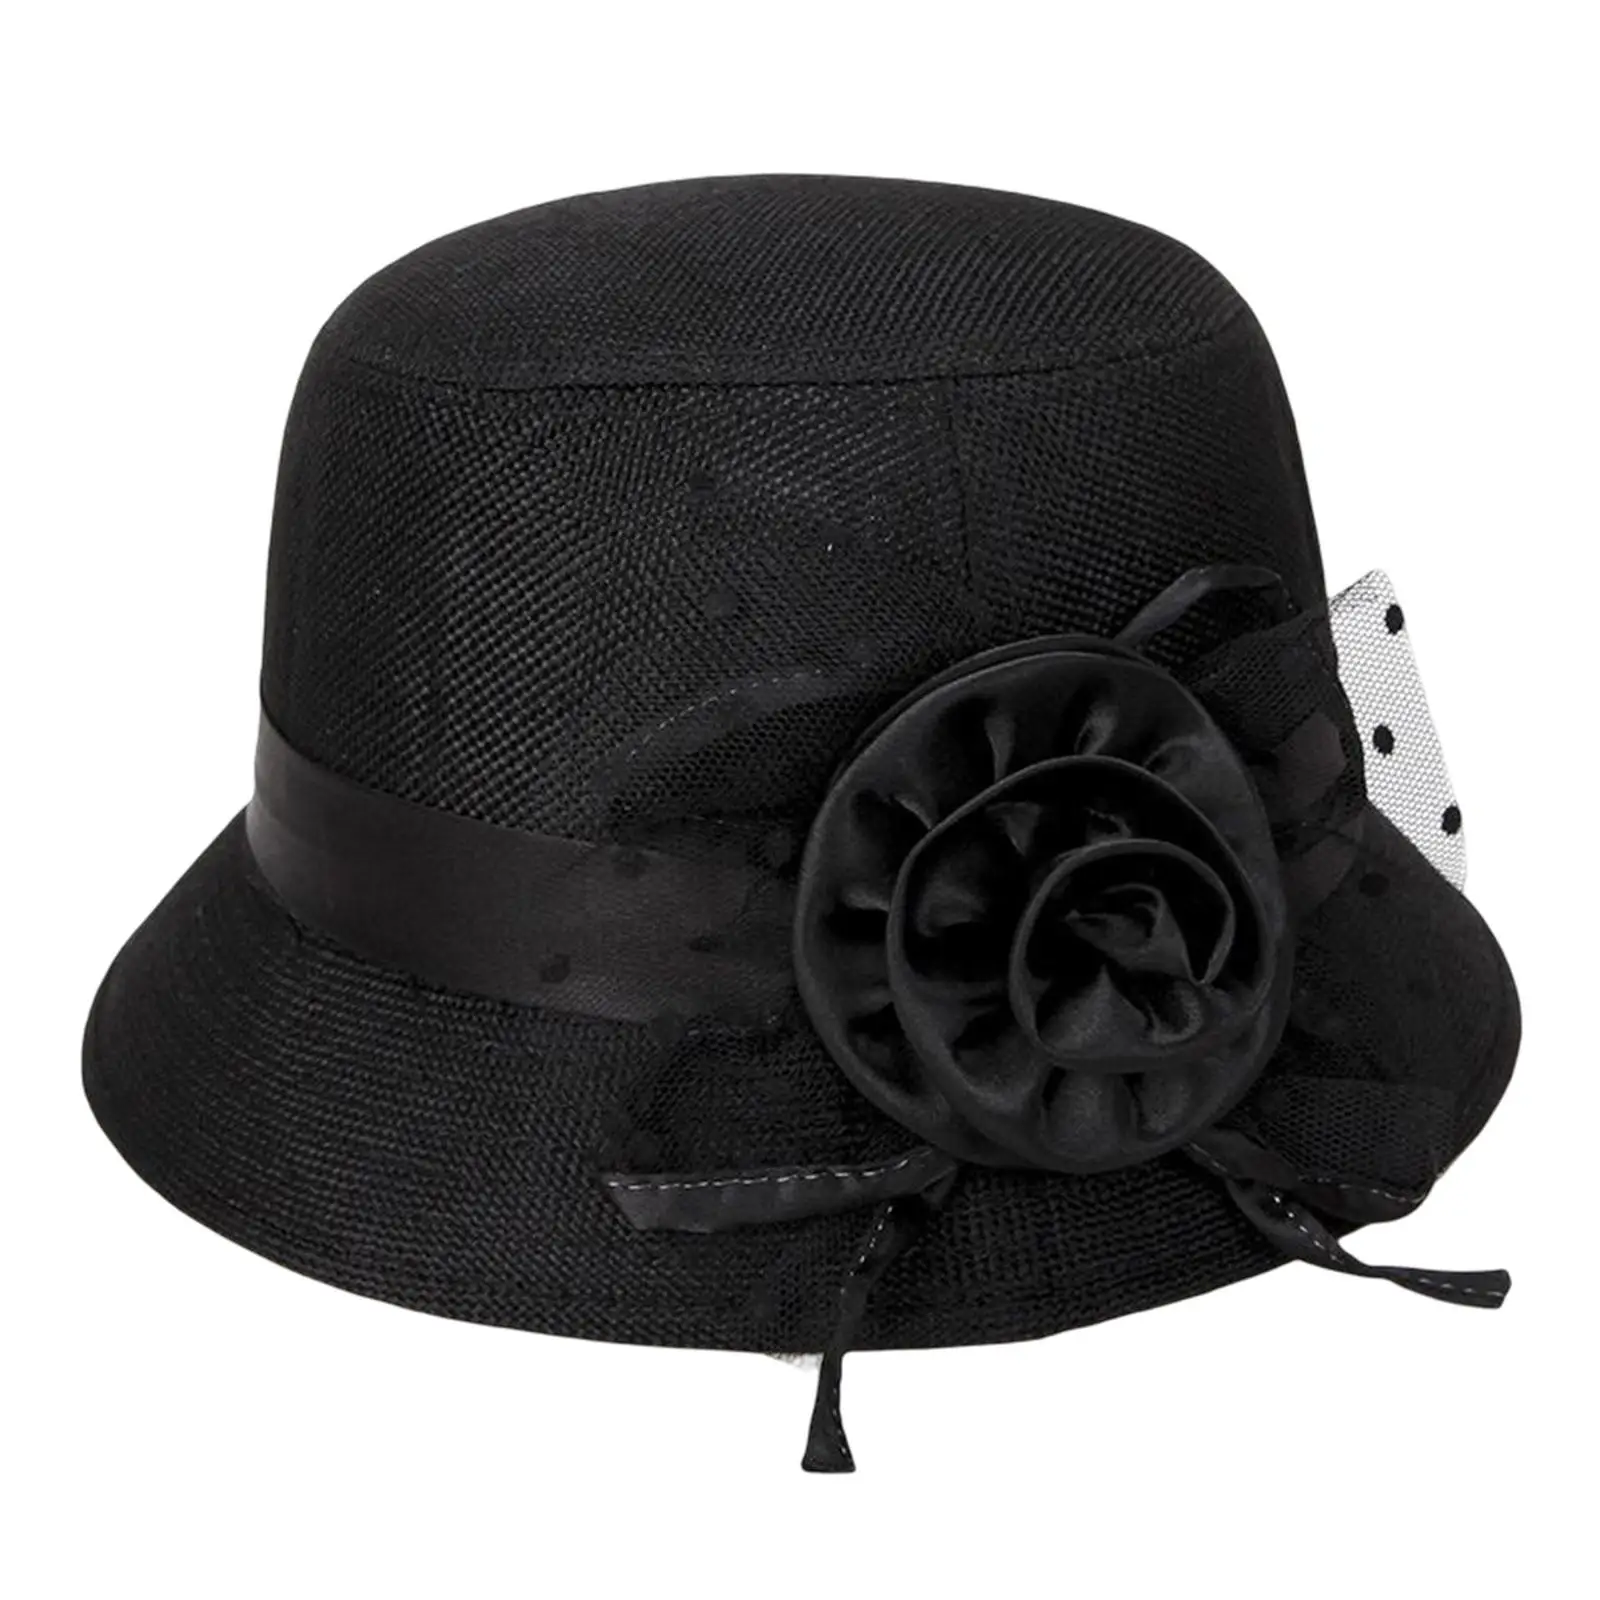 Women Top Hat Sunhat Decoration Sun Protection with Bow for Outdoor Costume